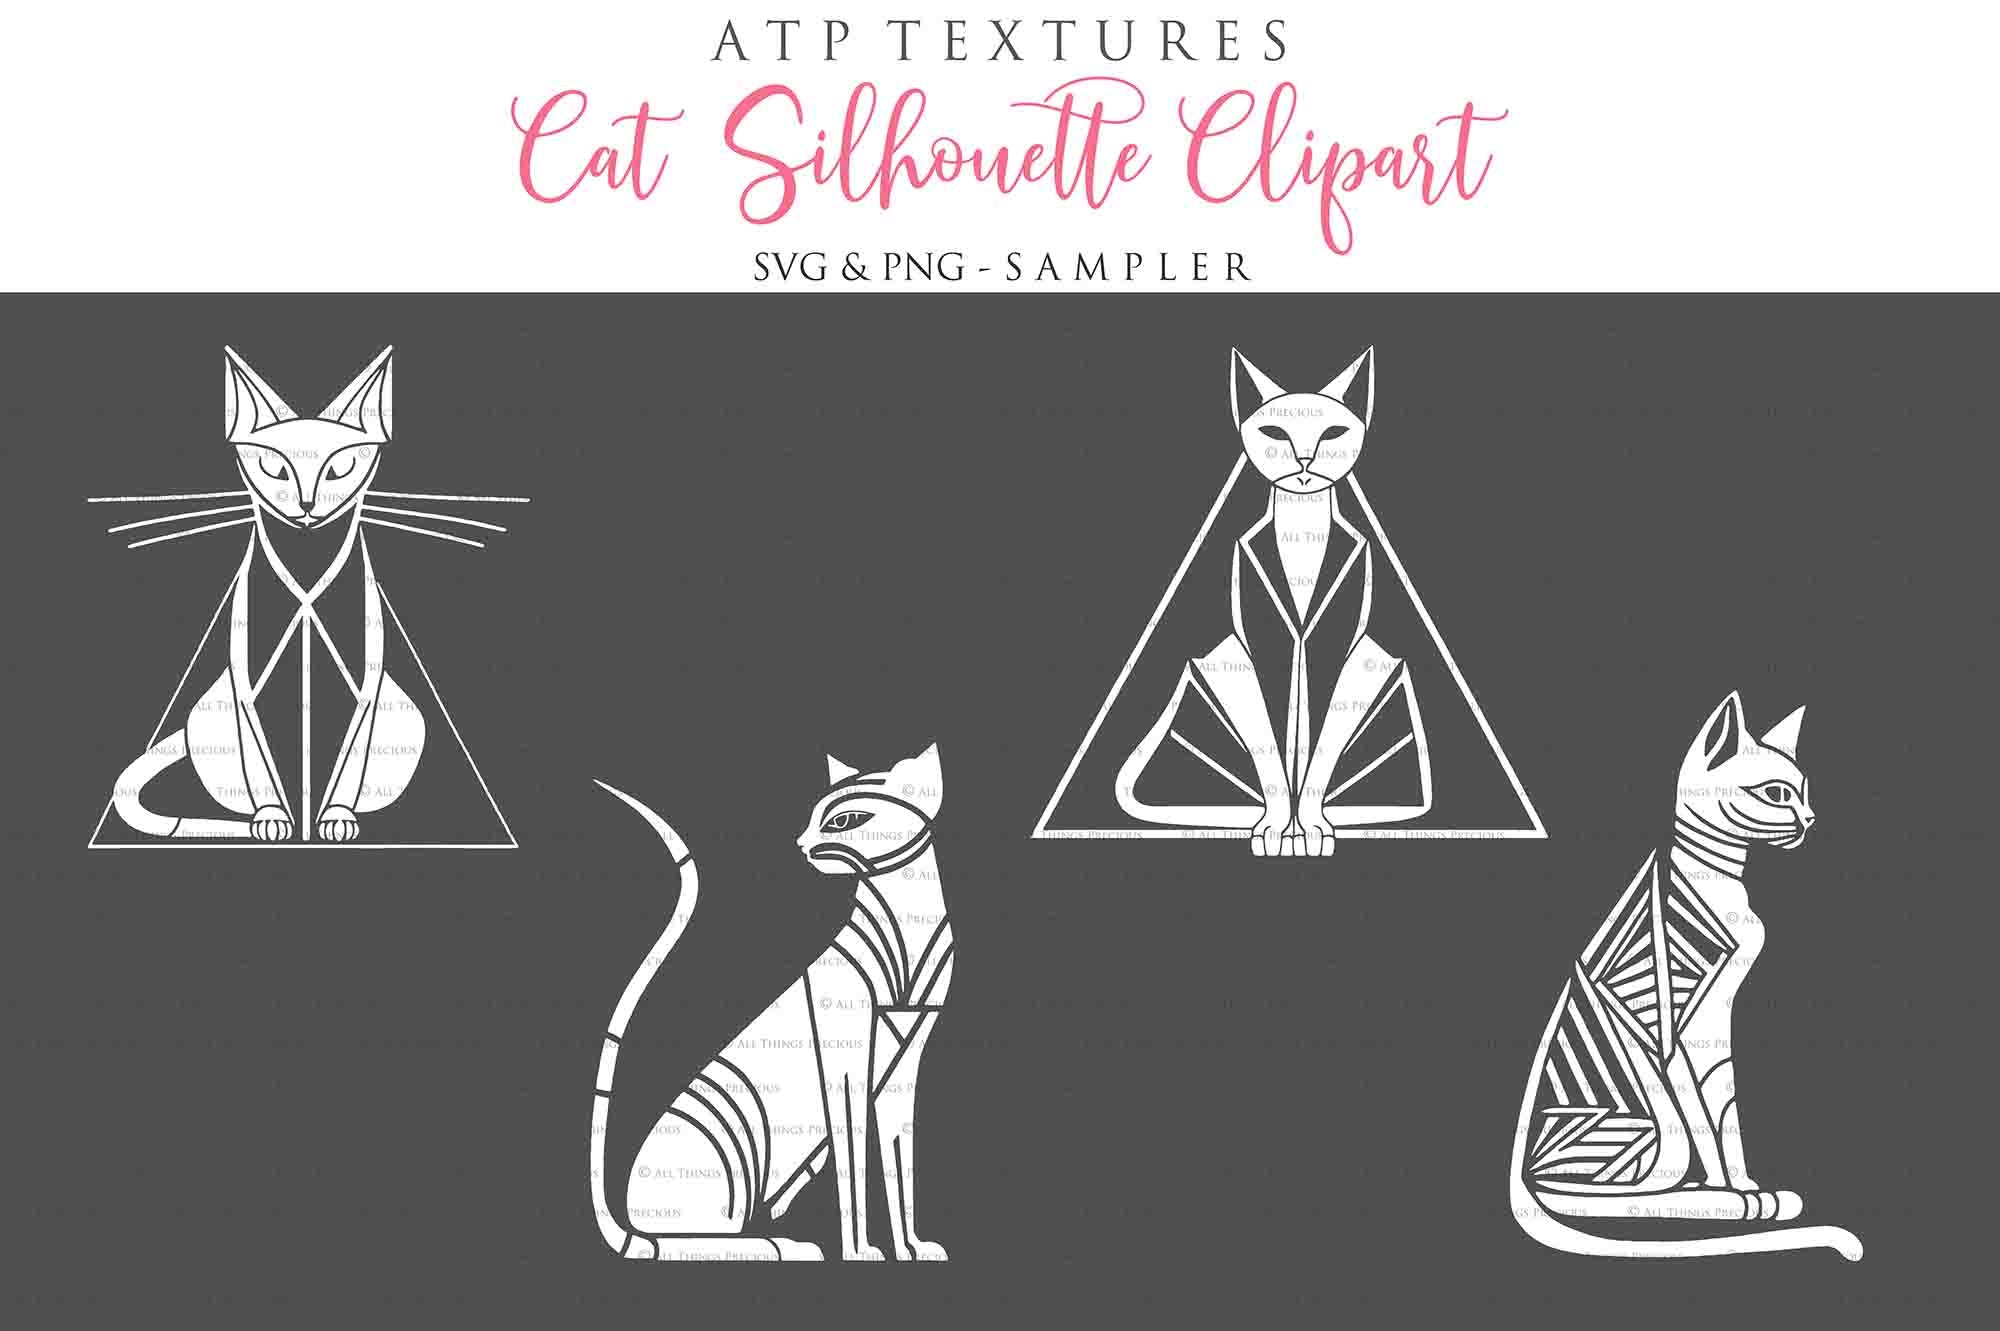 SVG Clipart for Cricut, Digital Art, Sublimation Print and Scrapbooking.Sweet Bees in High resolution.This is a digital product. This set includes 20 SVG & PNG Cat Clipart. The PNG files are all in high resolution,300dpi.If you wish to use them for your fine art prints and photography edits without losing quality, you can! ATP Textures